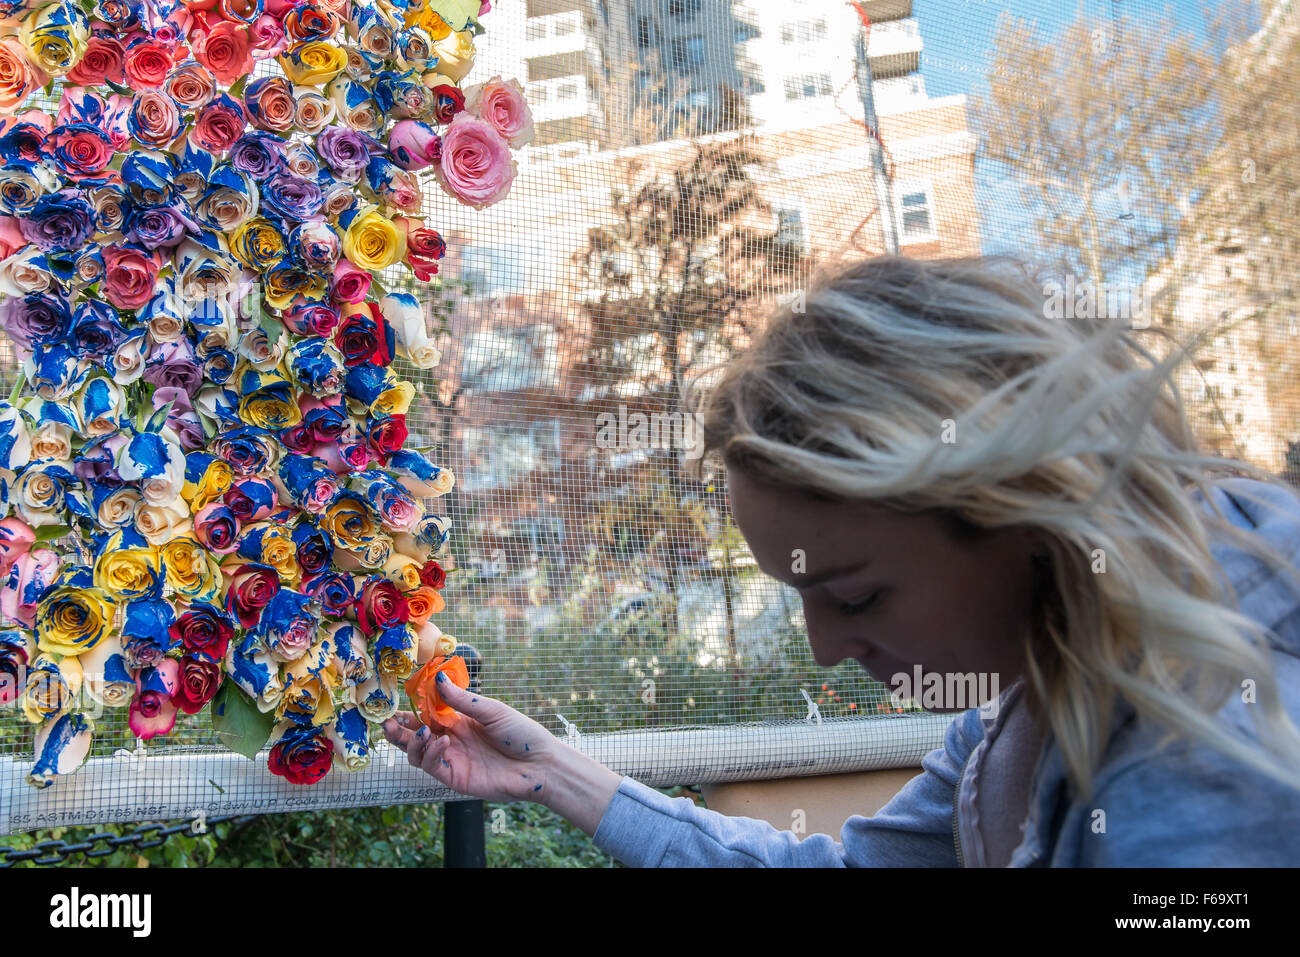 New York, United States. 14th Nov, 2015. A artist at the mass vigil in Washington Square Park assembles an hommage to the Paris attack victims made of flowers dipped in paint. Around New York City residents and elected officials reacted individually and collectively to express their grief over the terrorist attacks in Paris that claimed over 100 lives and left hundreds wounded. Credit:  Albin Lohr-Jones/Pacific Press/Alamy Live News Stock Photo